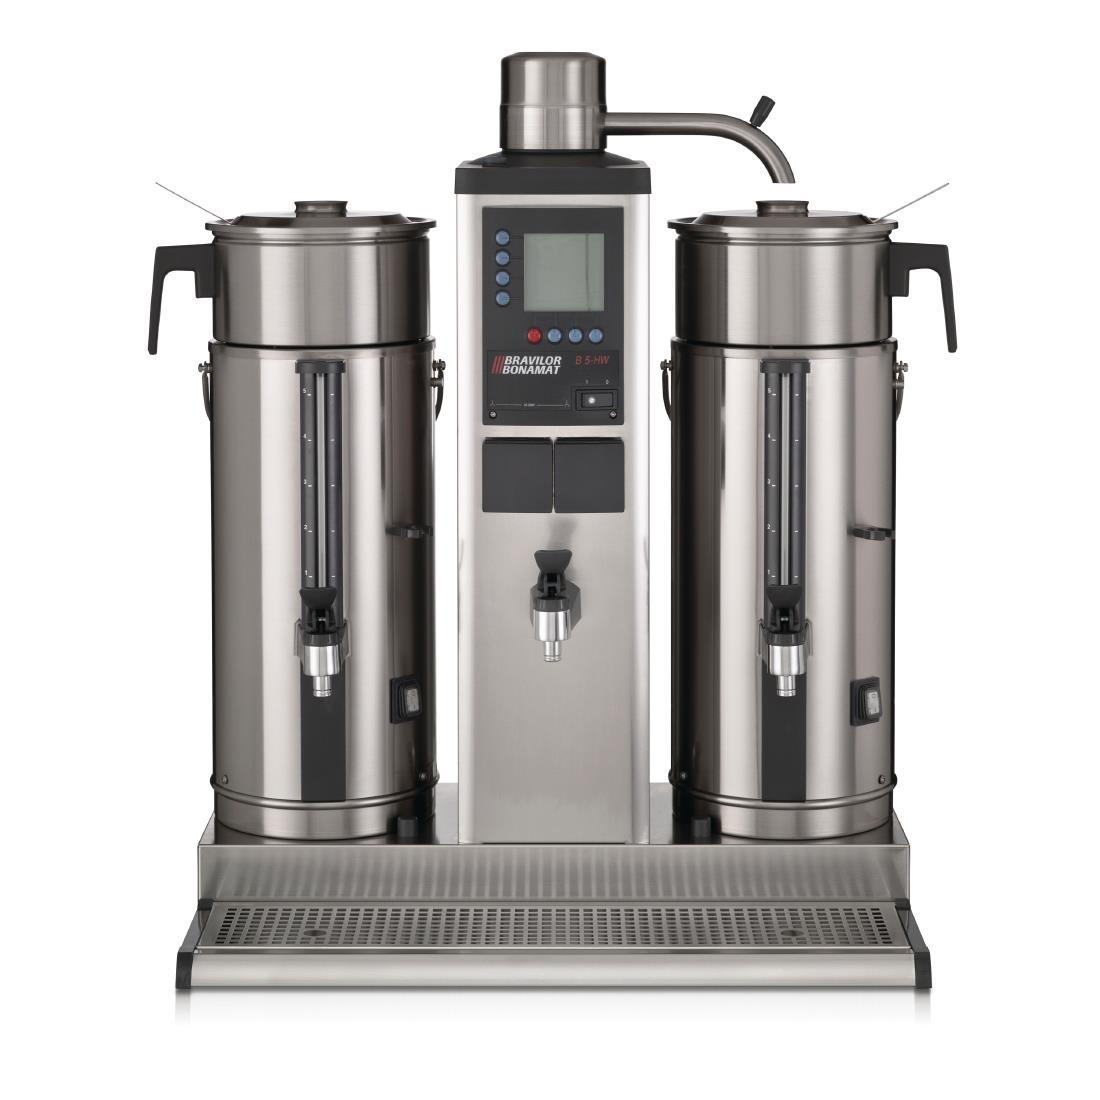 Bravilor B20 HW Bulk Coffee Brewer with 2x20Ltr Coffee Urns and Hot Water Tap 3 Phase - DC693-3P  - 2